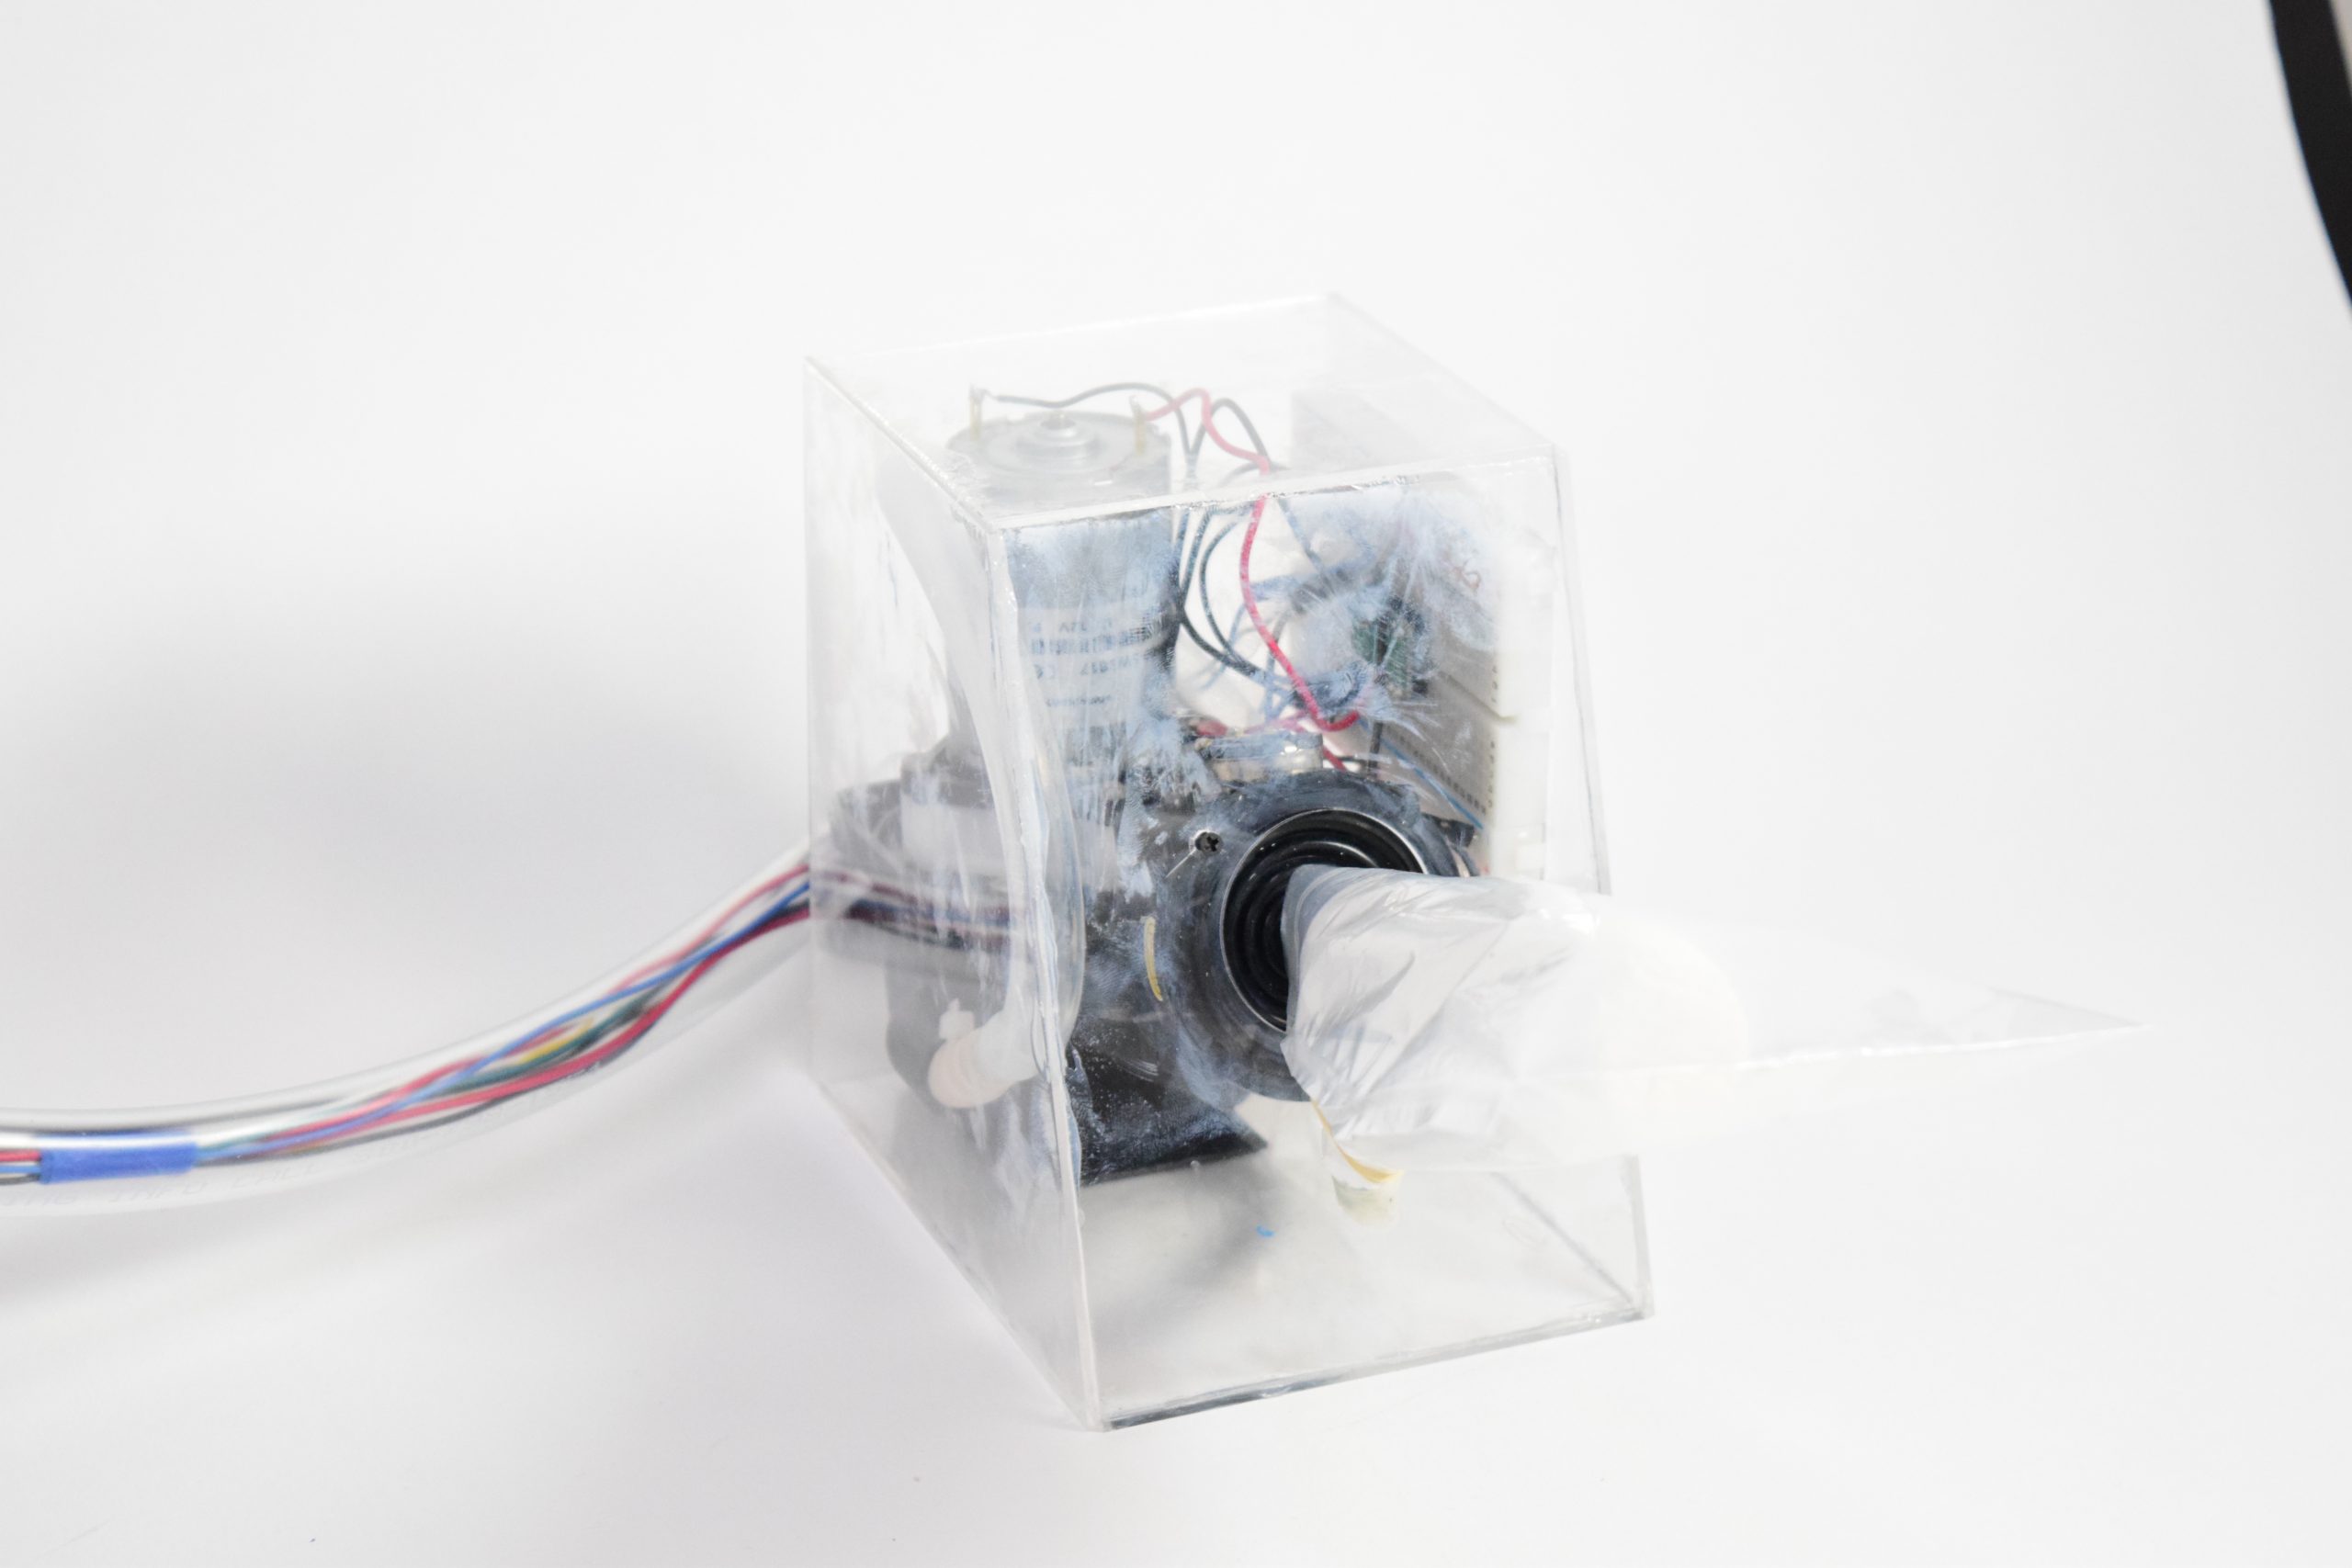 This picture shows an acrylic box with an air pump and wires inside. There is a clear tube with wires and a joystick attached to the box.